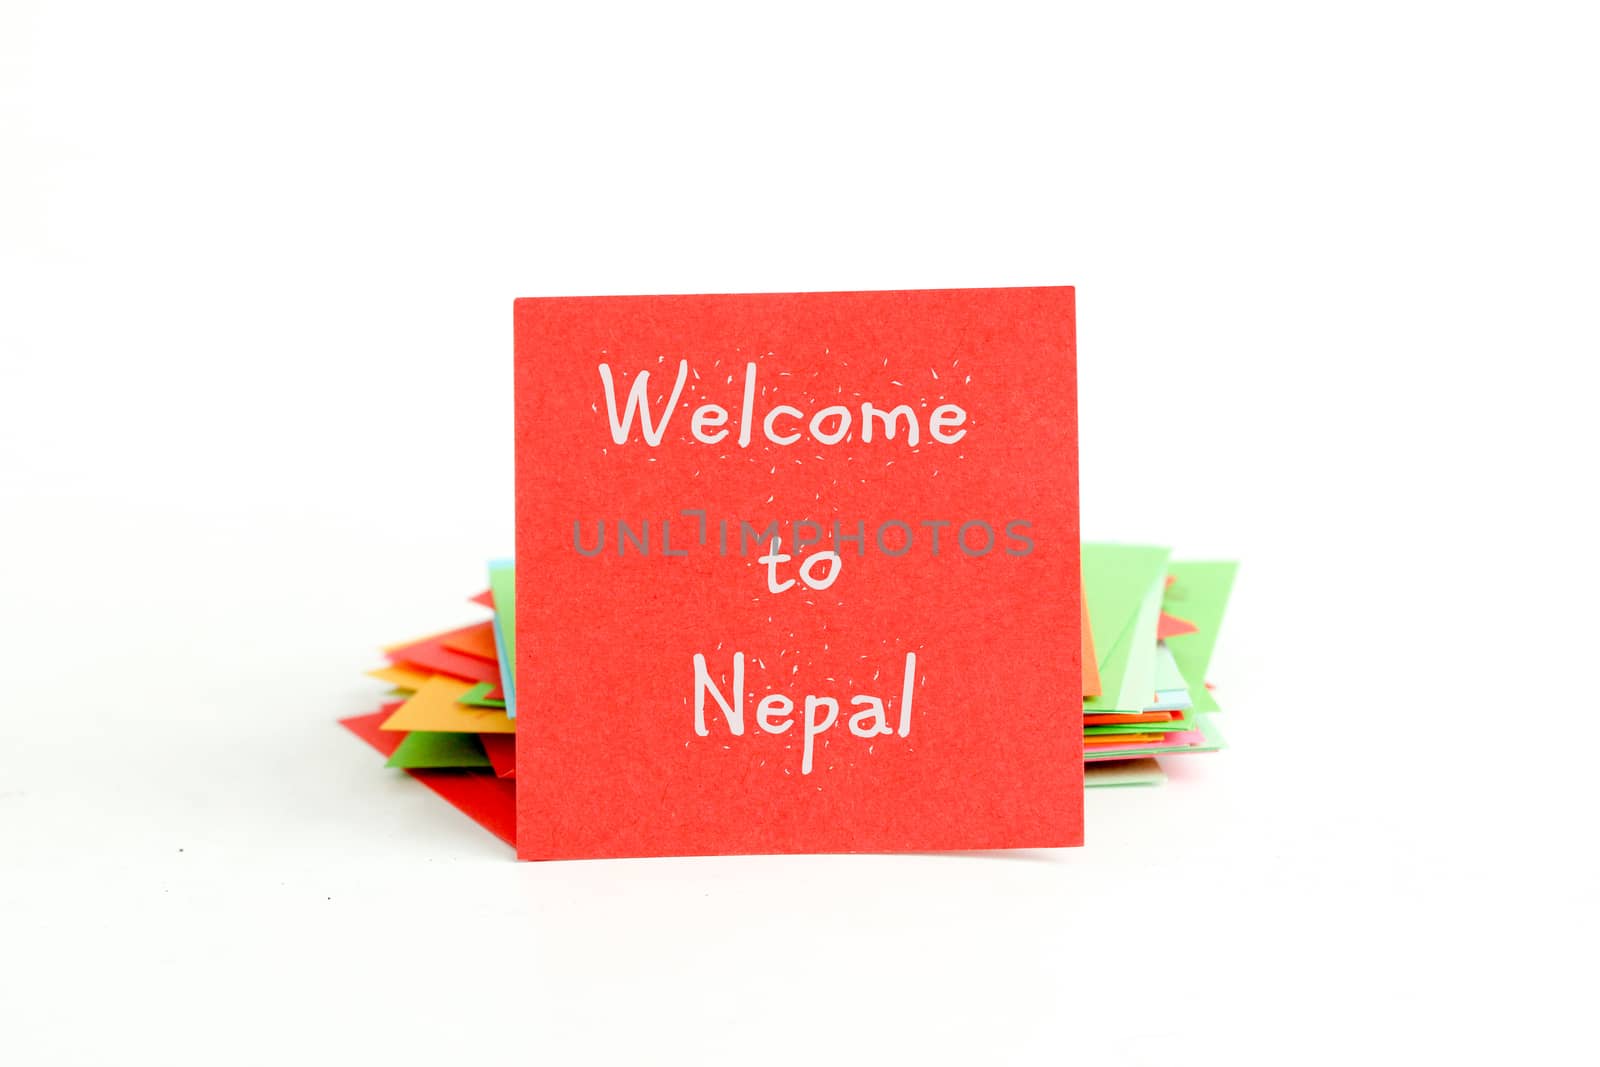 picture of a red note paper with text welcome to nepal